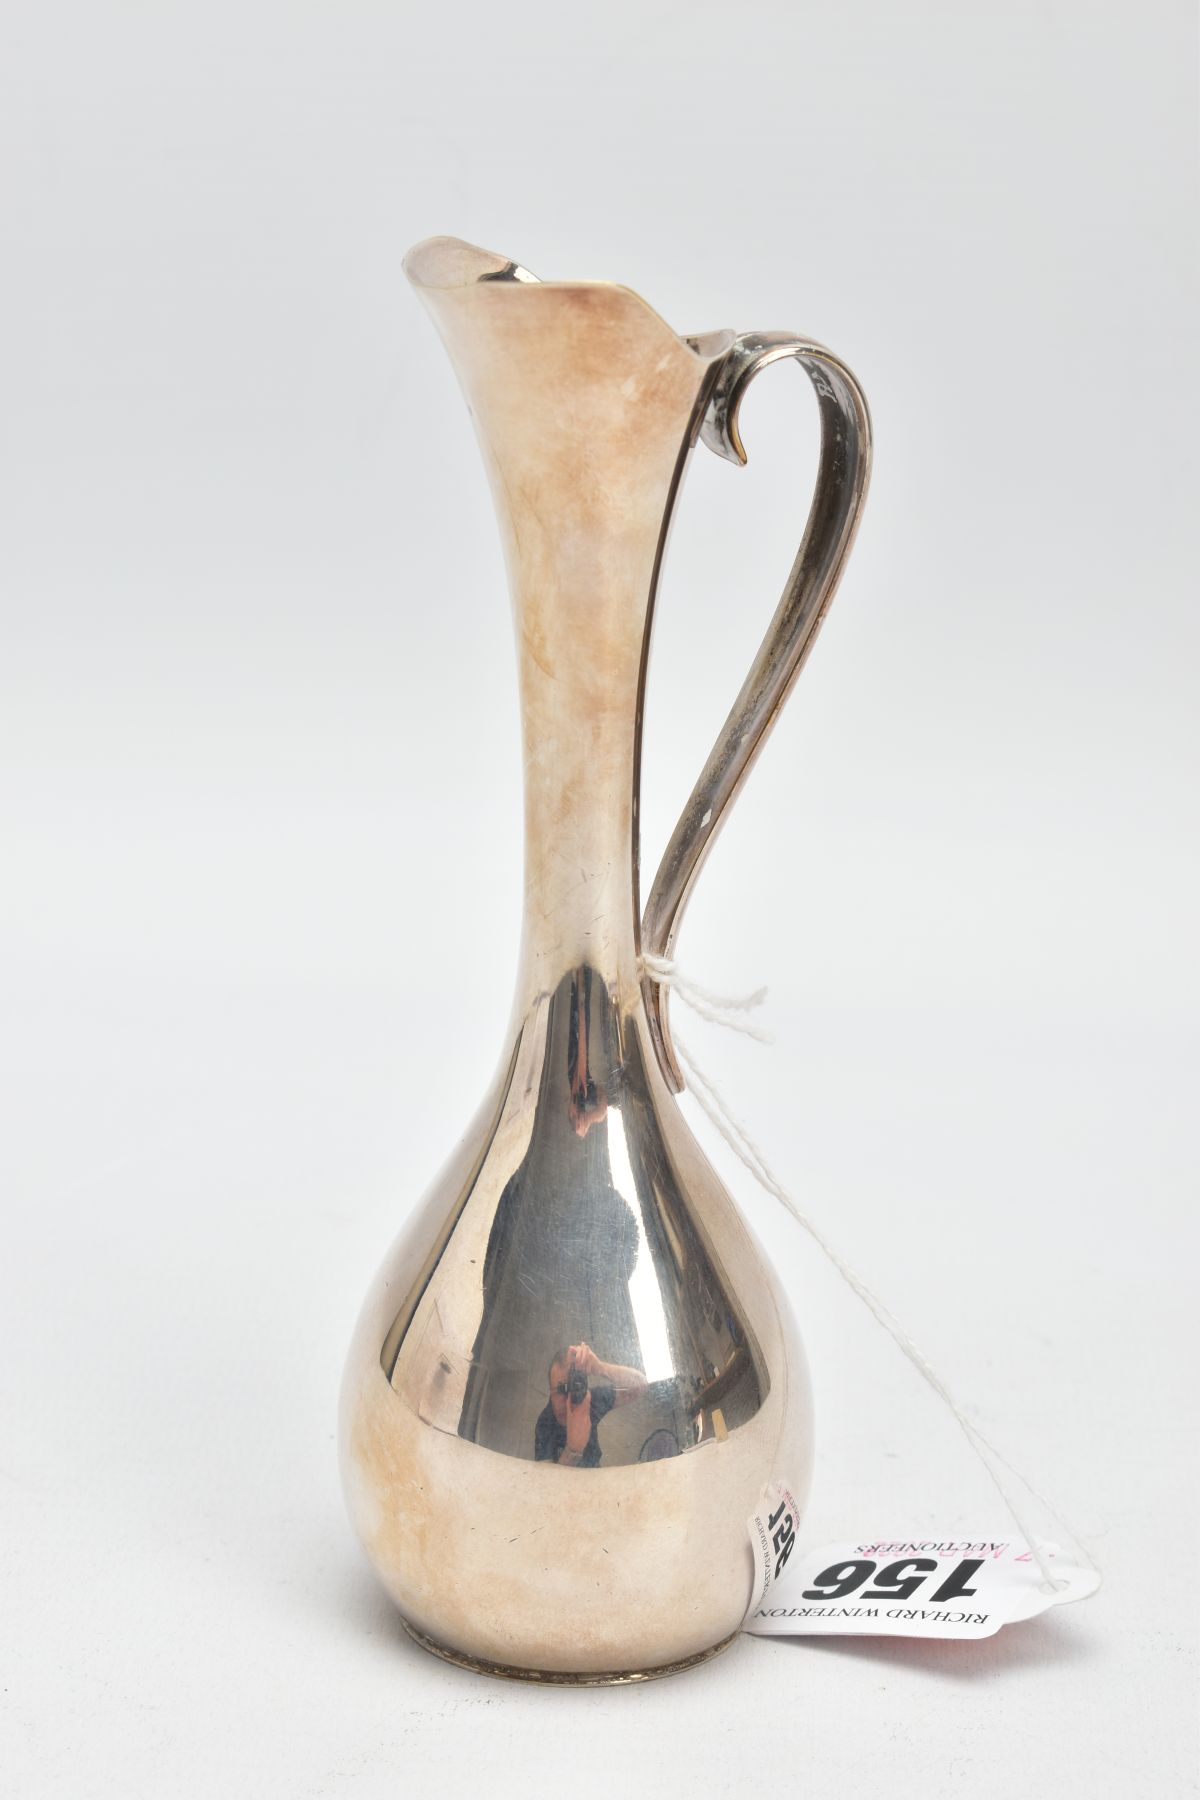 A DANISH SILVER POSY VASE, plain polished form fitted with a scroll handle, approximate height 14. - Image 3 of 5